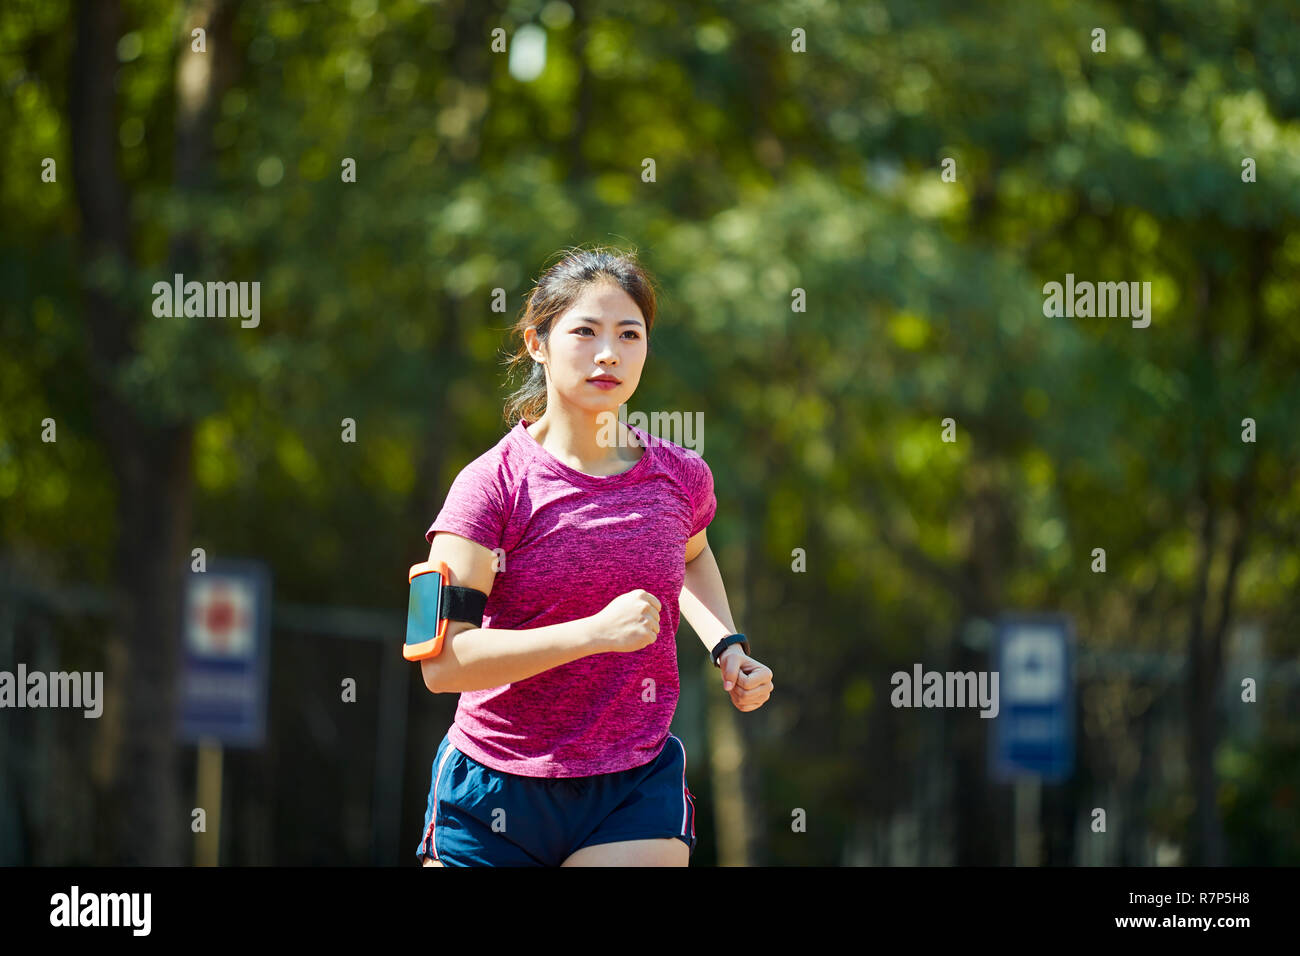 young asian woman track and field athlete running Stock Photo